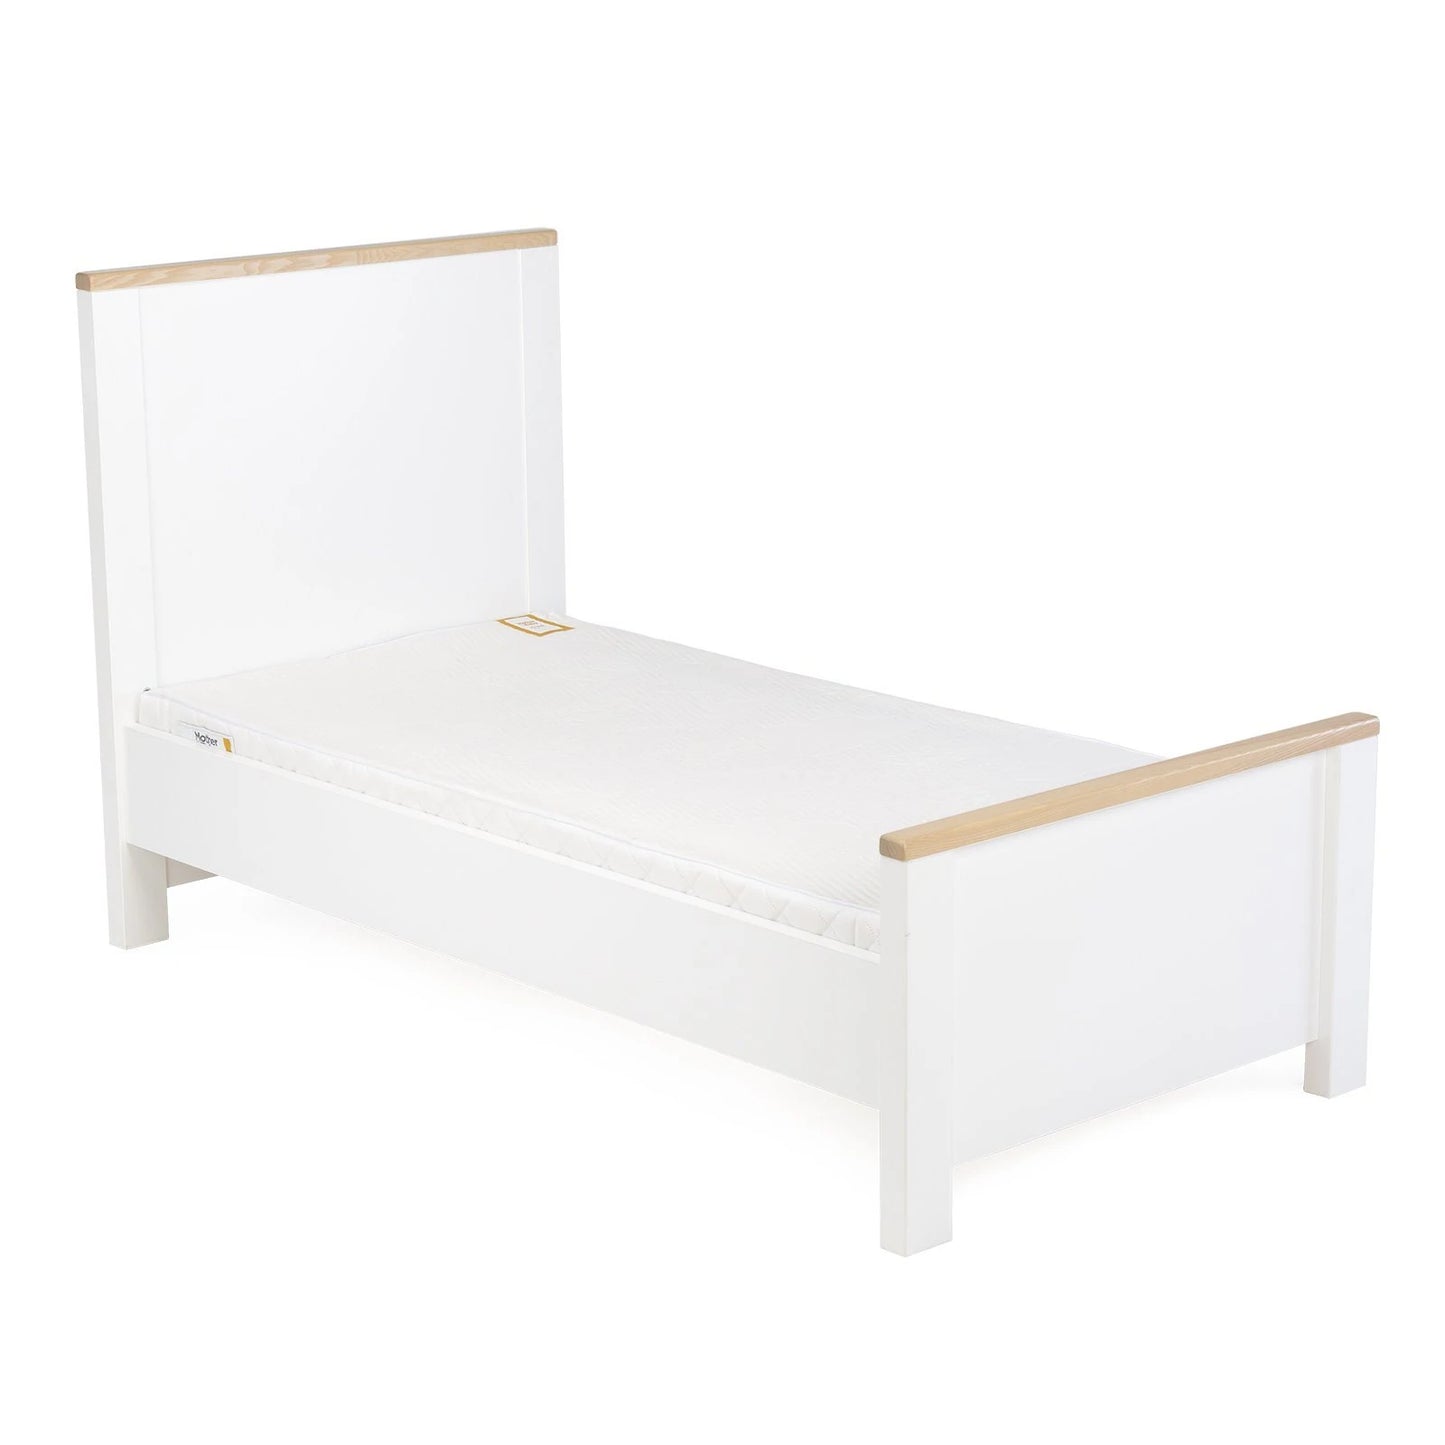 Cuddle Co Aylesbury Cot Bed - White & Ash